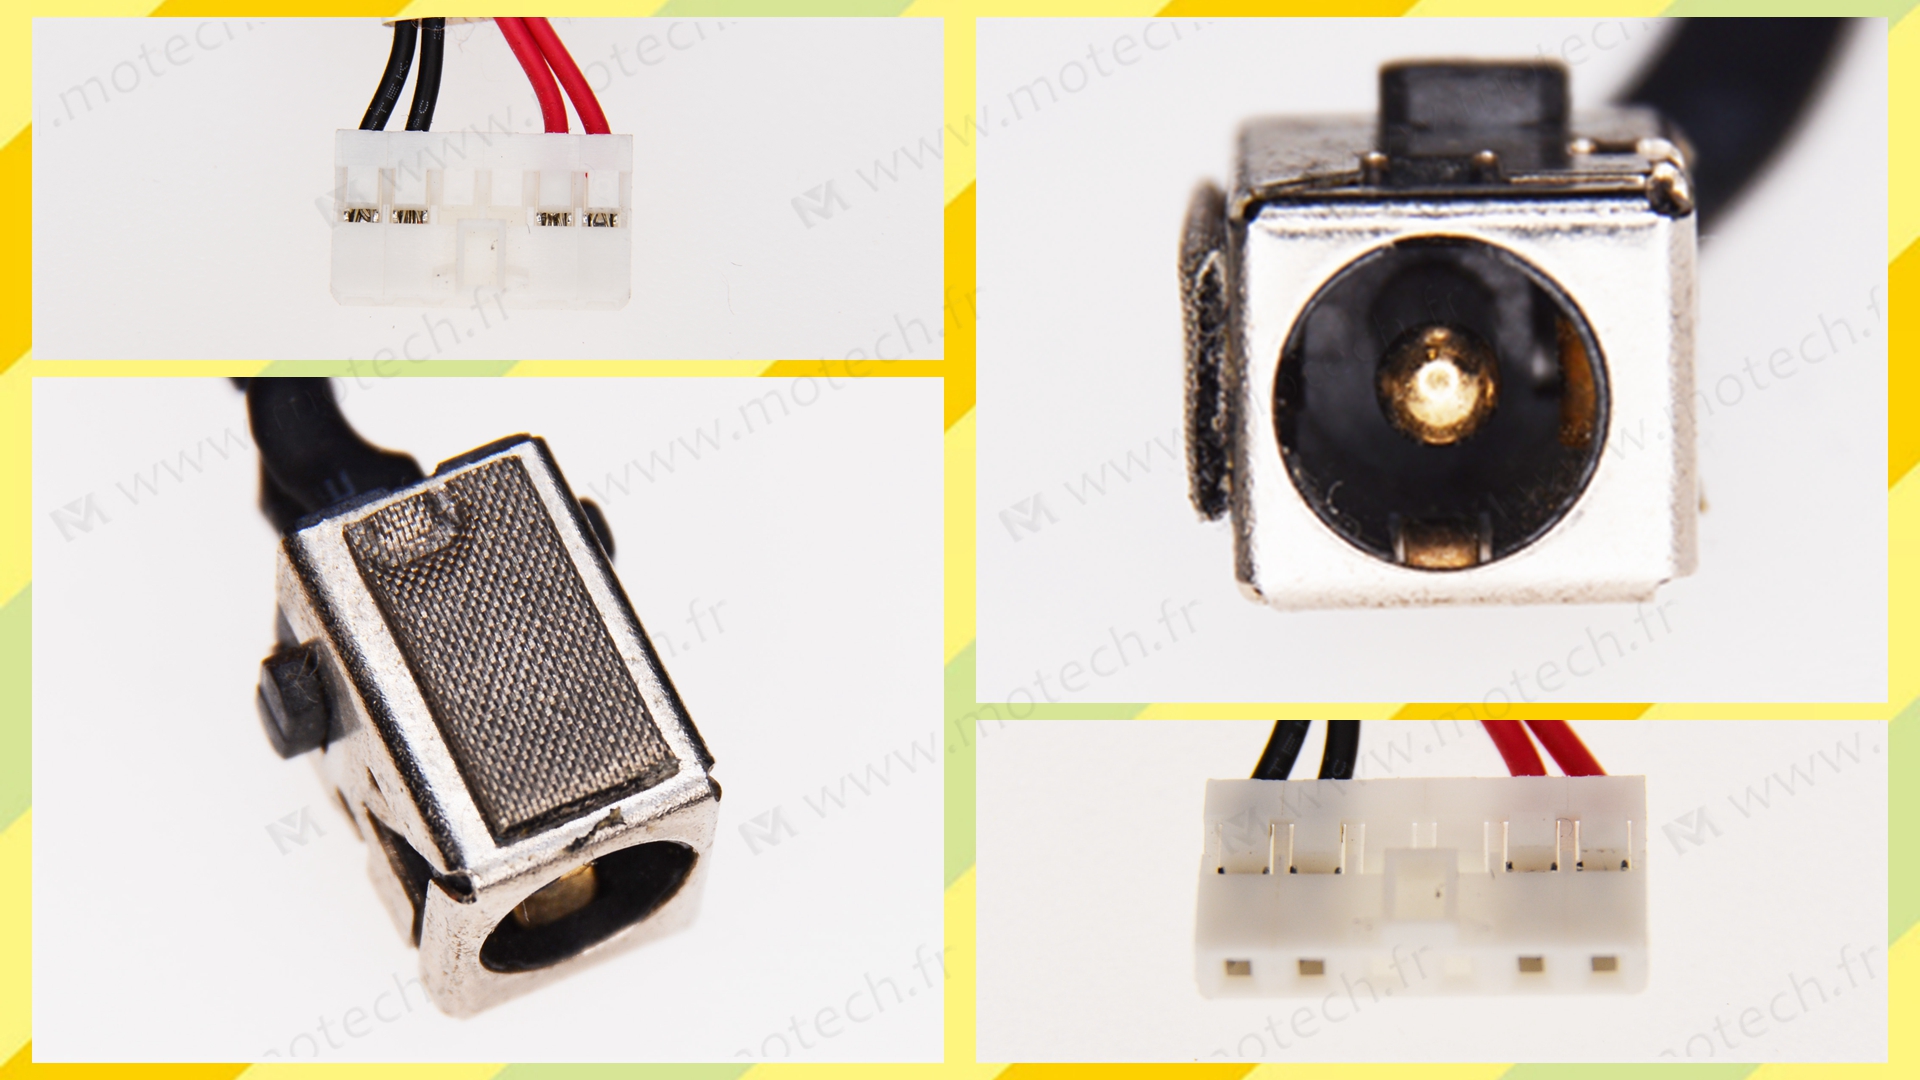 Asus R700A charging connector, Asus R700A DC Power Jack, Asus R700A DC IN Cable, Asus R700A Power Jack, Asus R700A plug, Asus R700A Jack socket, Asus R700A connecteur de charge, 